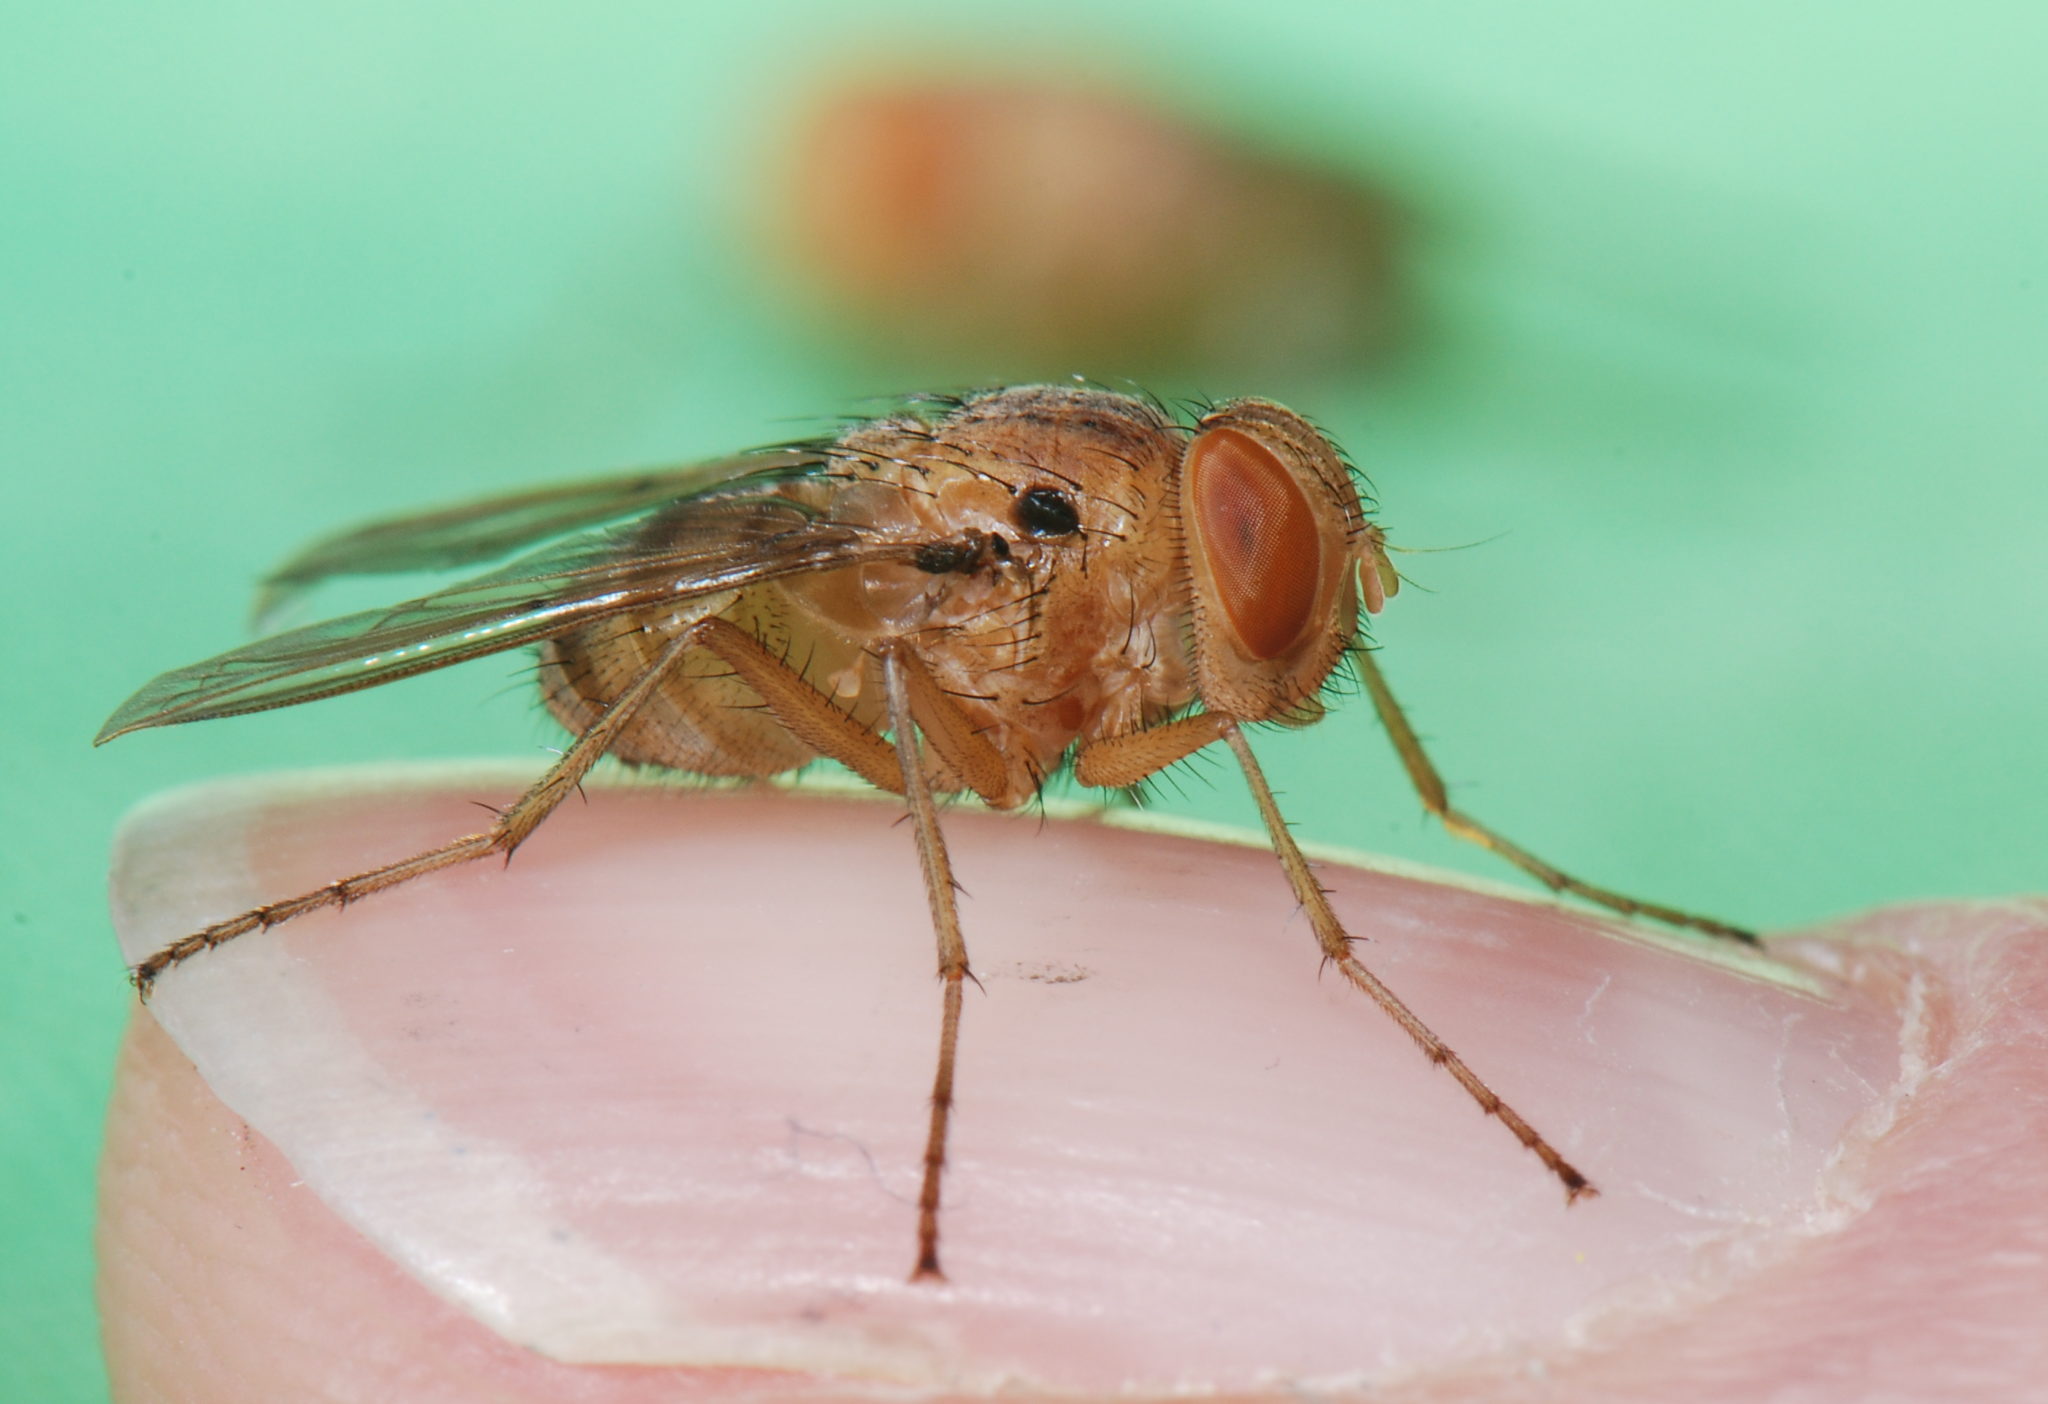 A lowly fly may offer hope to hearing loss sufferers